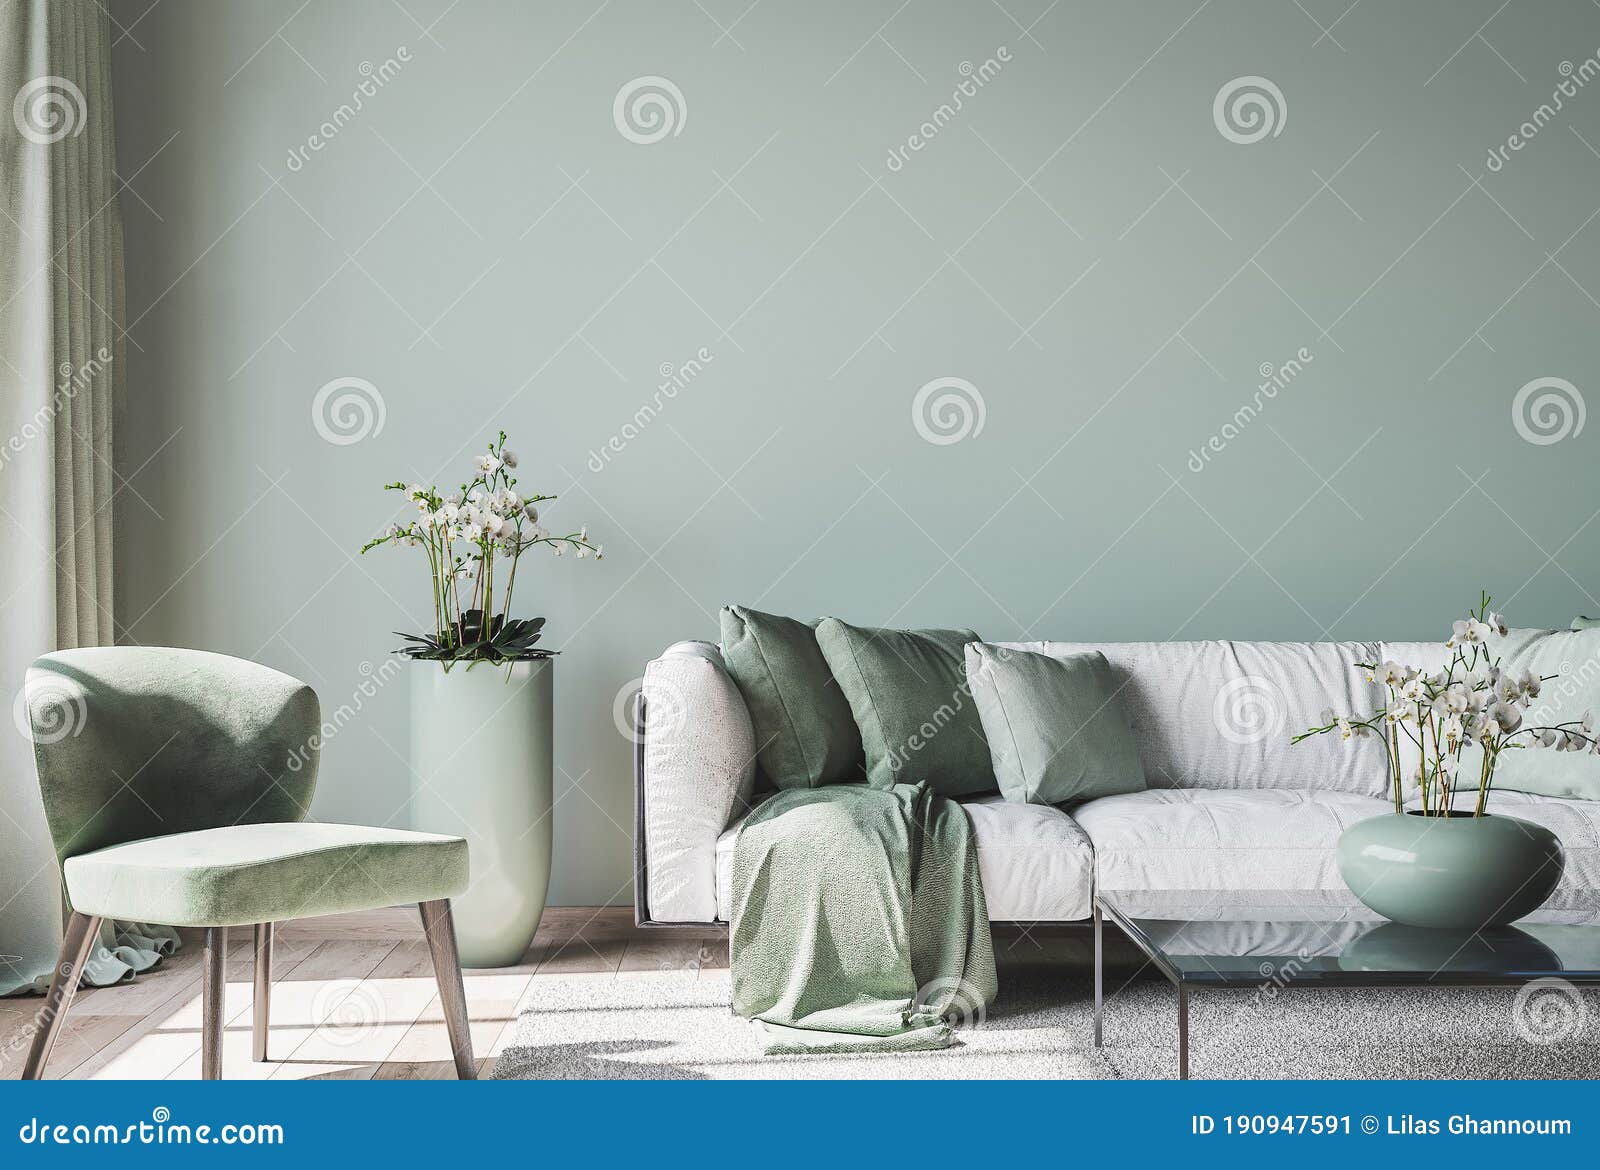 living room interior with frame mock up, modern furniture and trendy home accessories